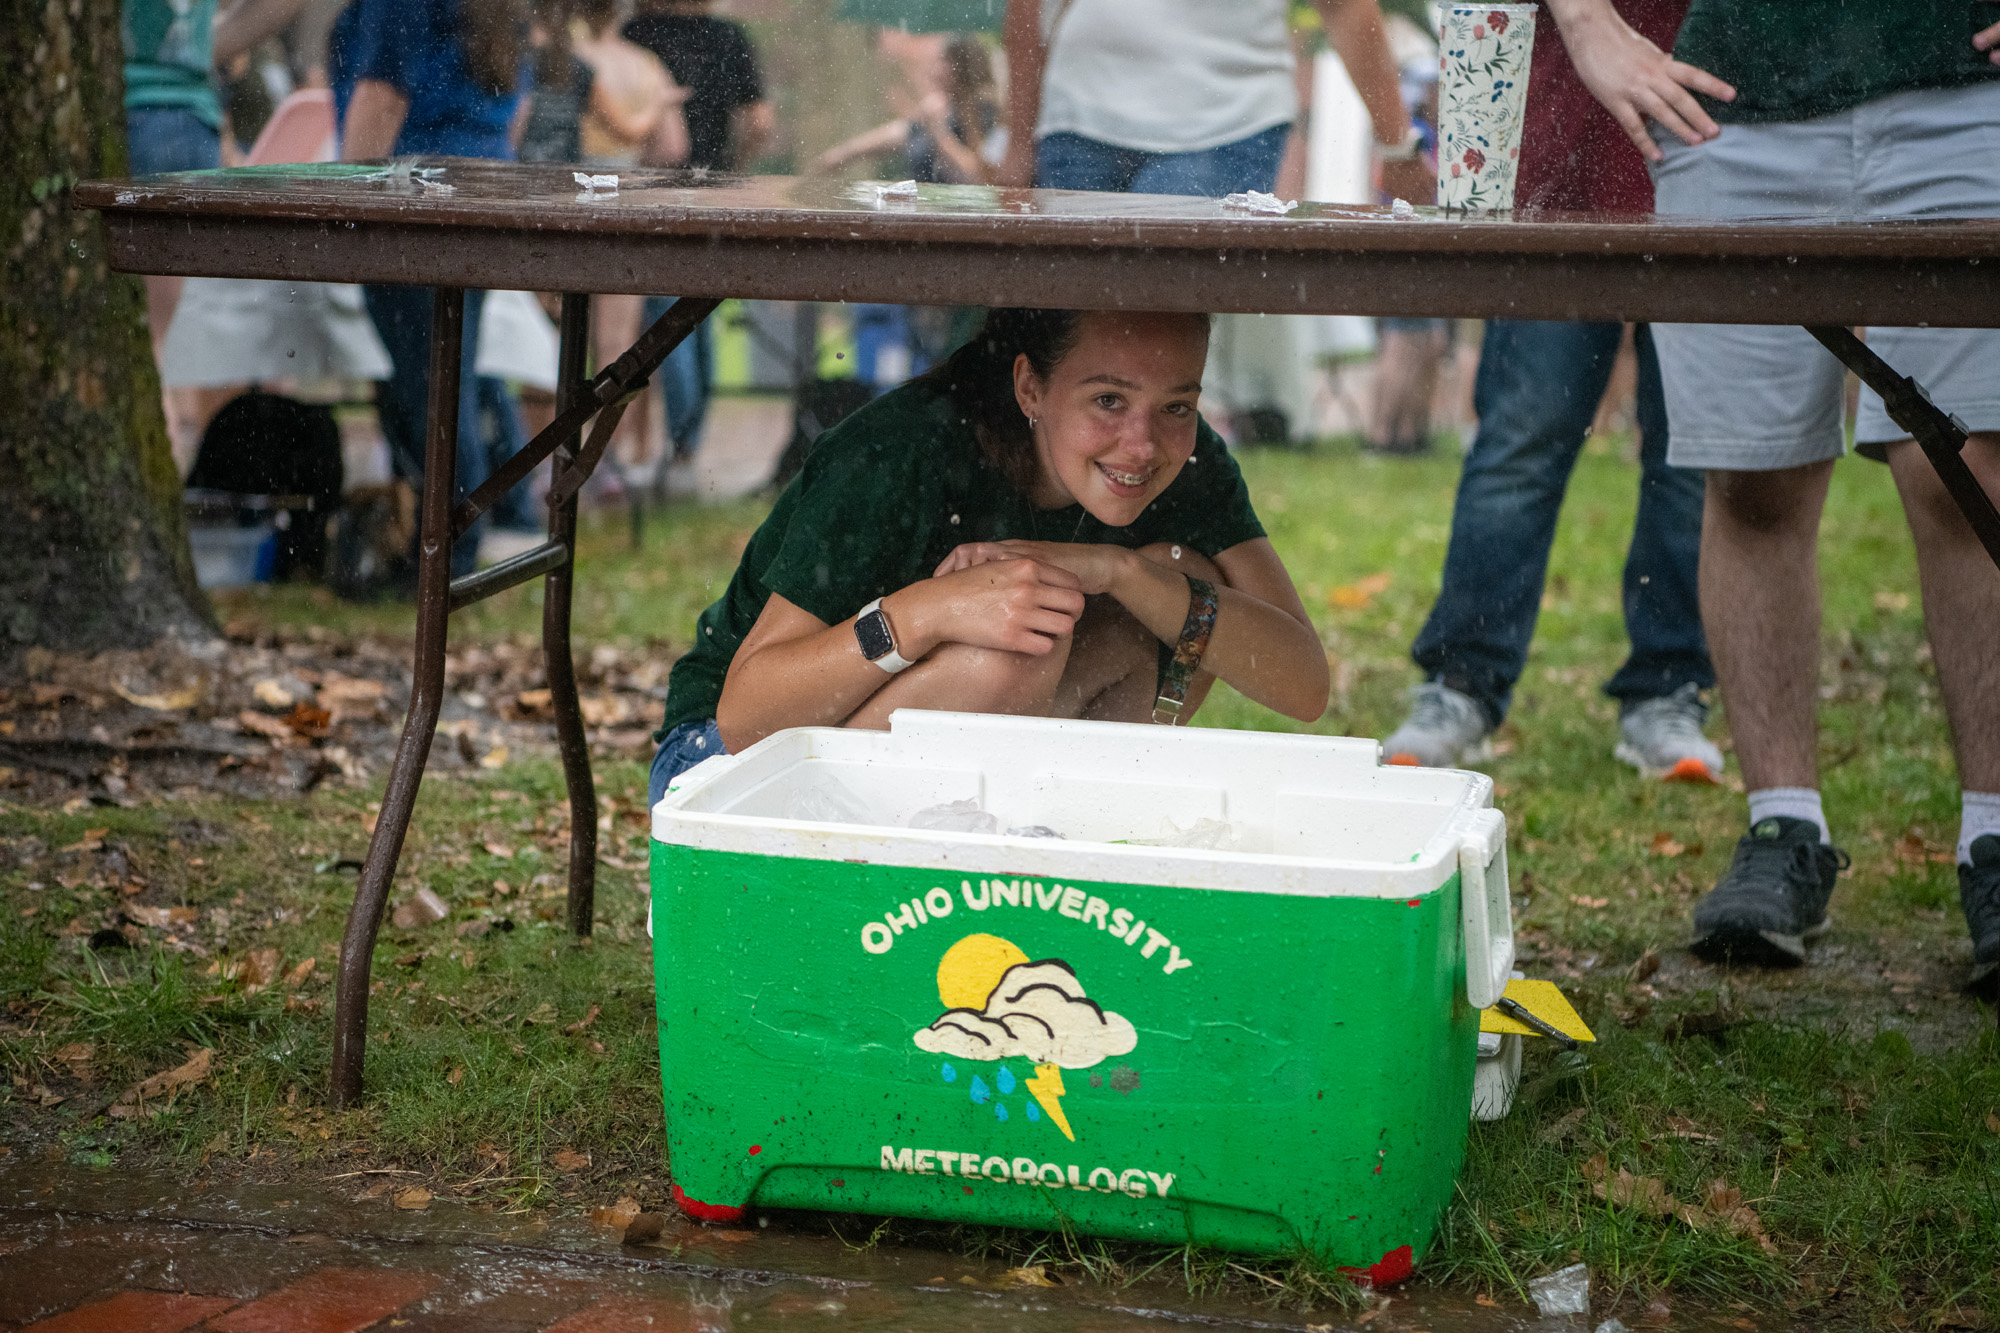 A student smiles while ducking under a table to avoid the rain